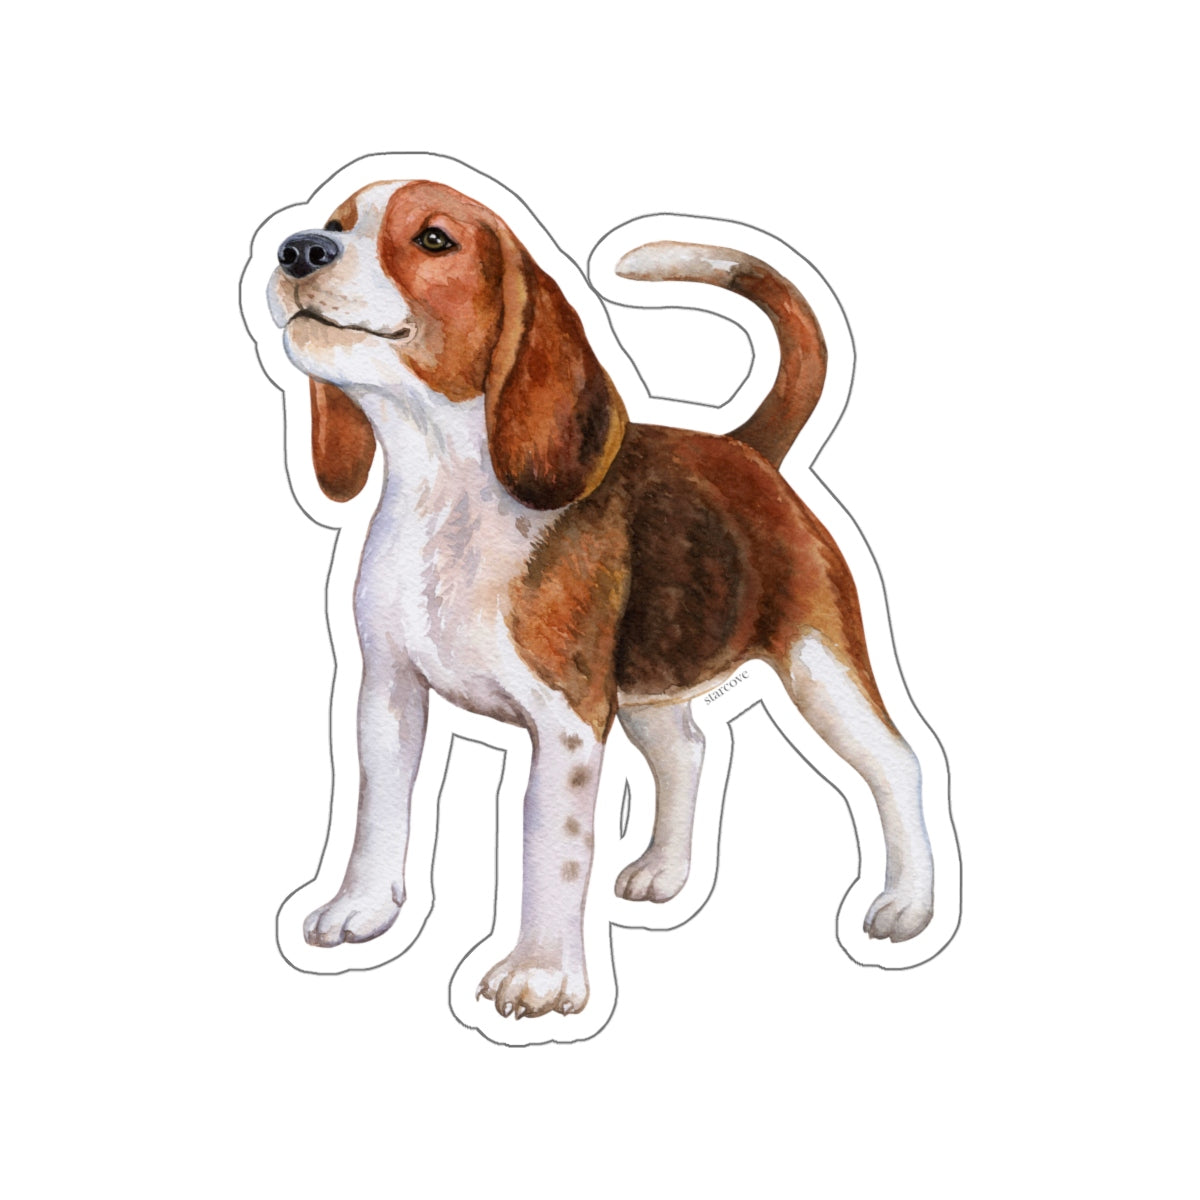 Puppy Dog Beagle Sticker, Watercolor Animal Breed Laptop Vinyl Cute Waterbottle Tumbler Car Bumper Aesthetic Label Wall Mural Decal Die Cut Starcove Fashion